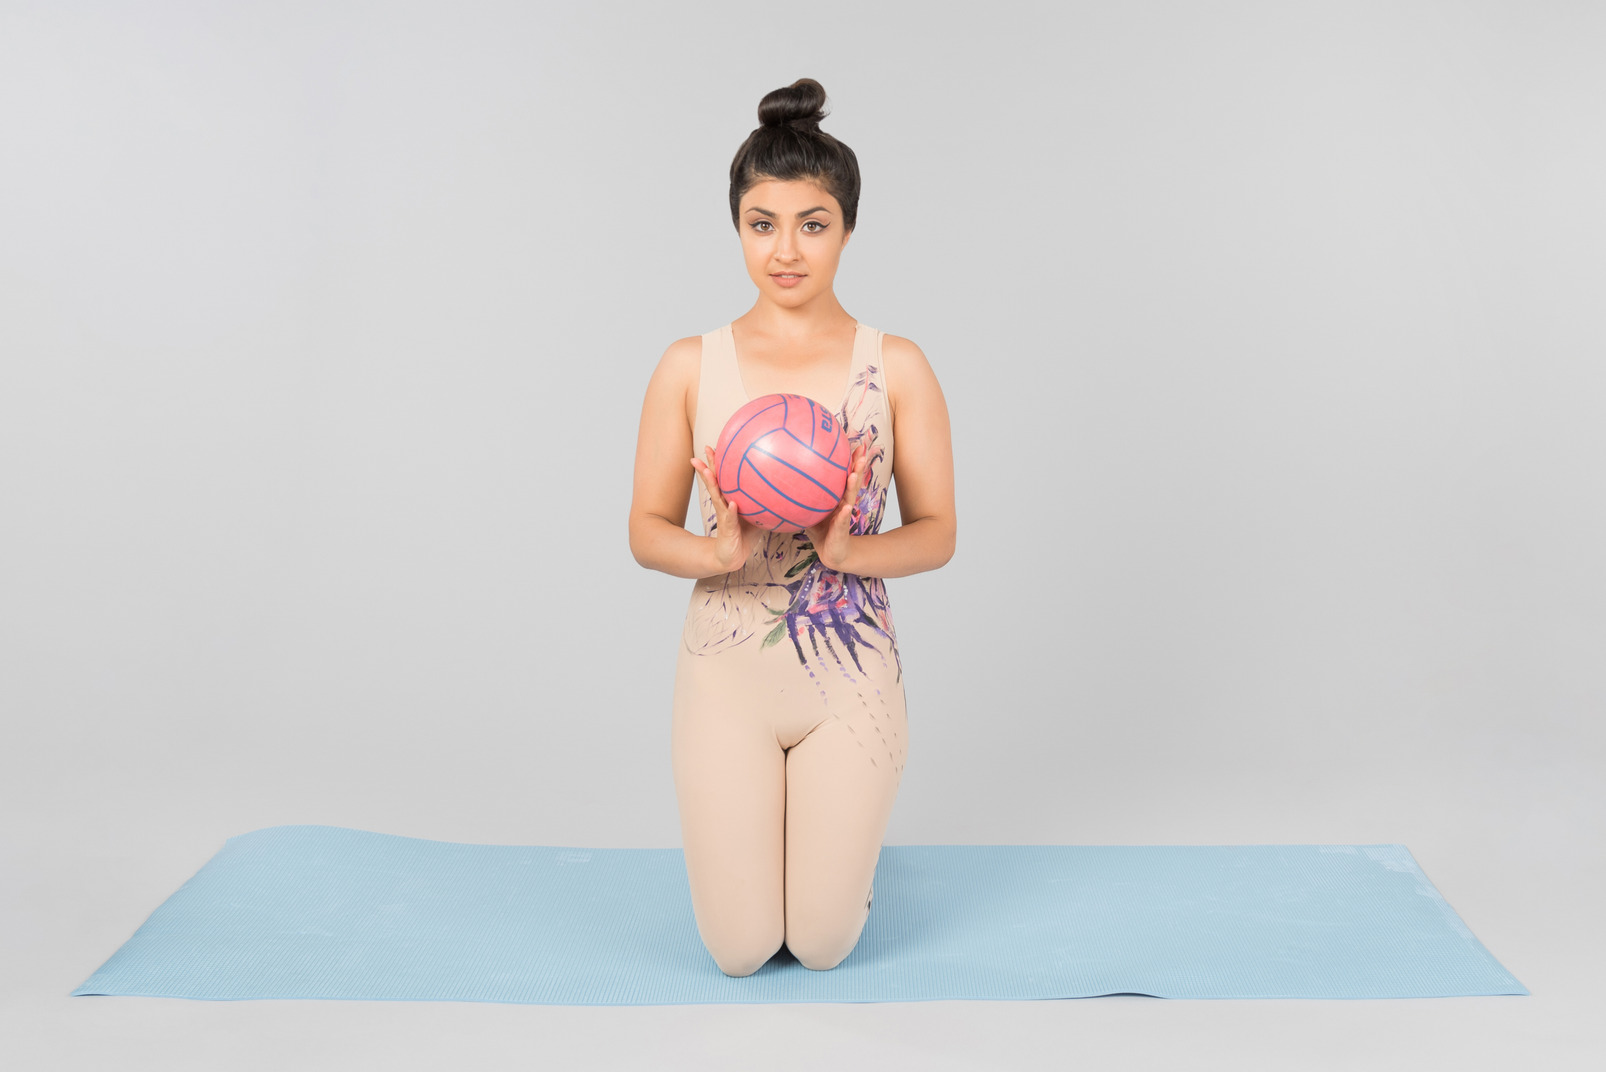 Young indian gymnast sitting on yoga mat and holding ball